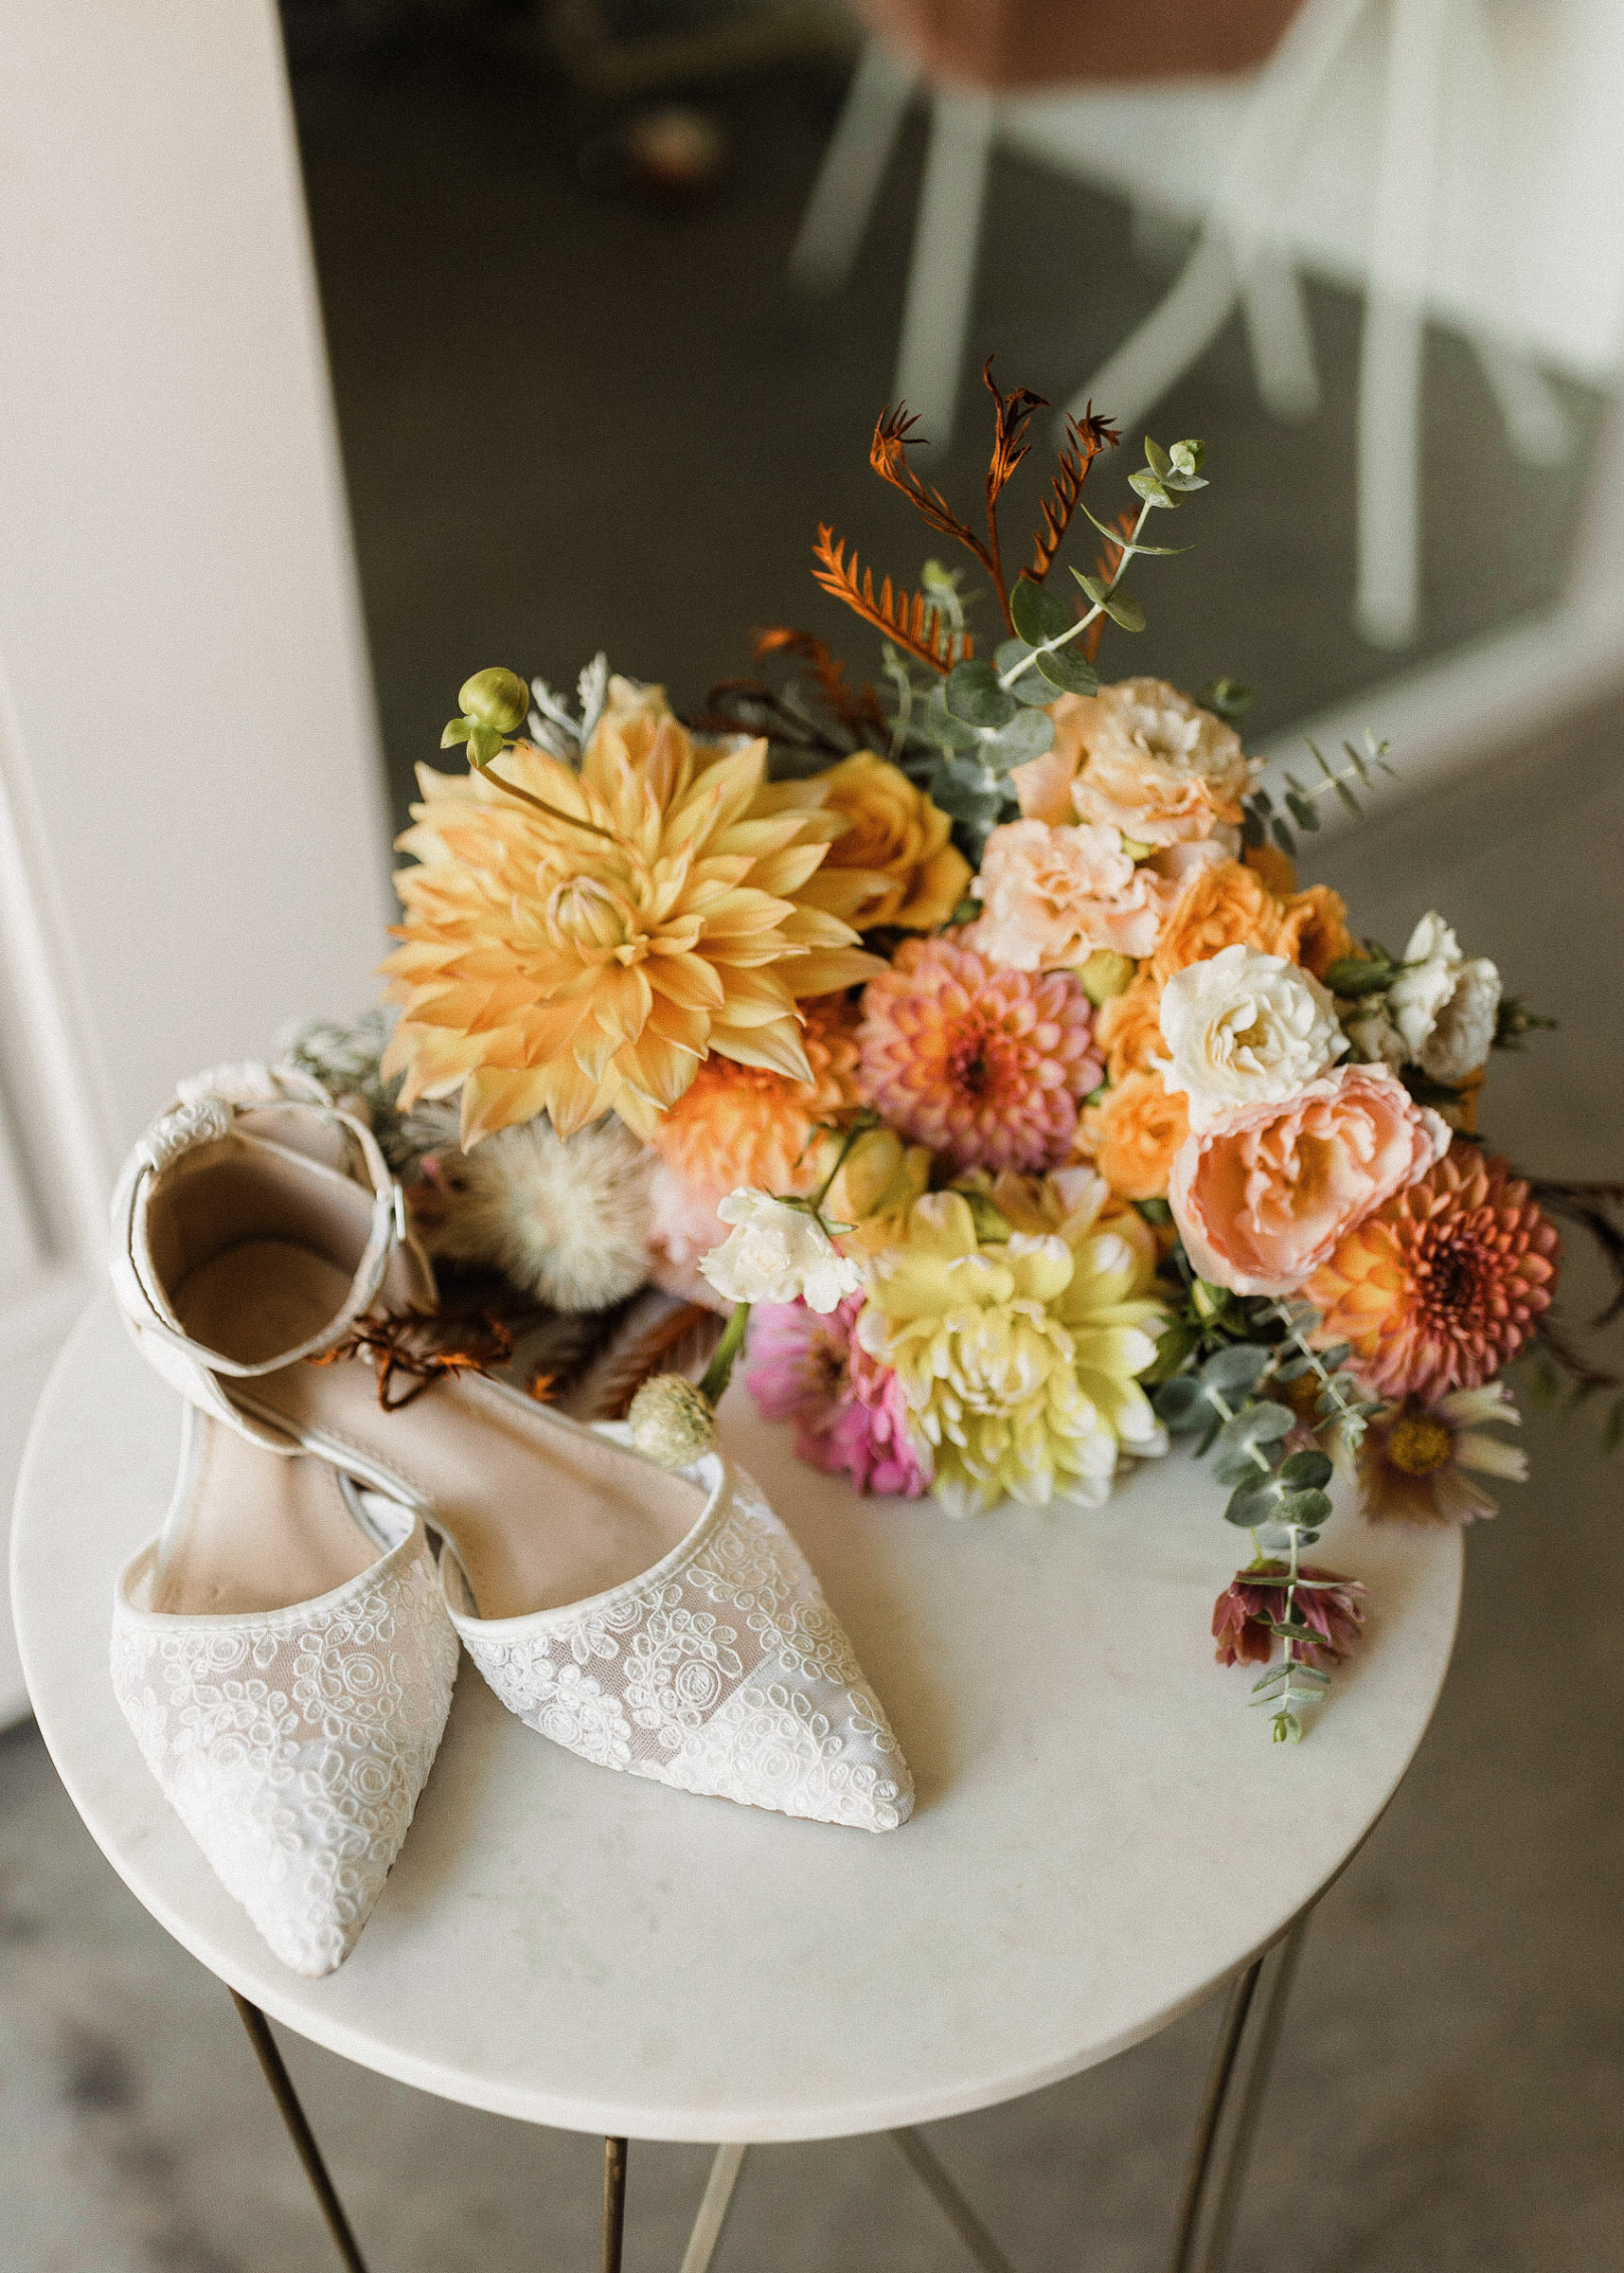 White, lacy wedding shoes rest on a side table with a bridal bouquet in shades of peach, pink, and yellow